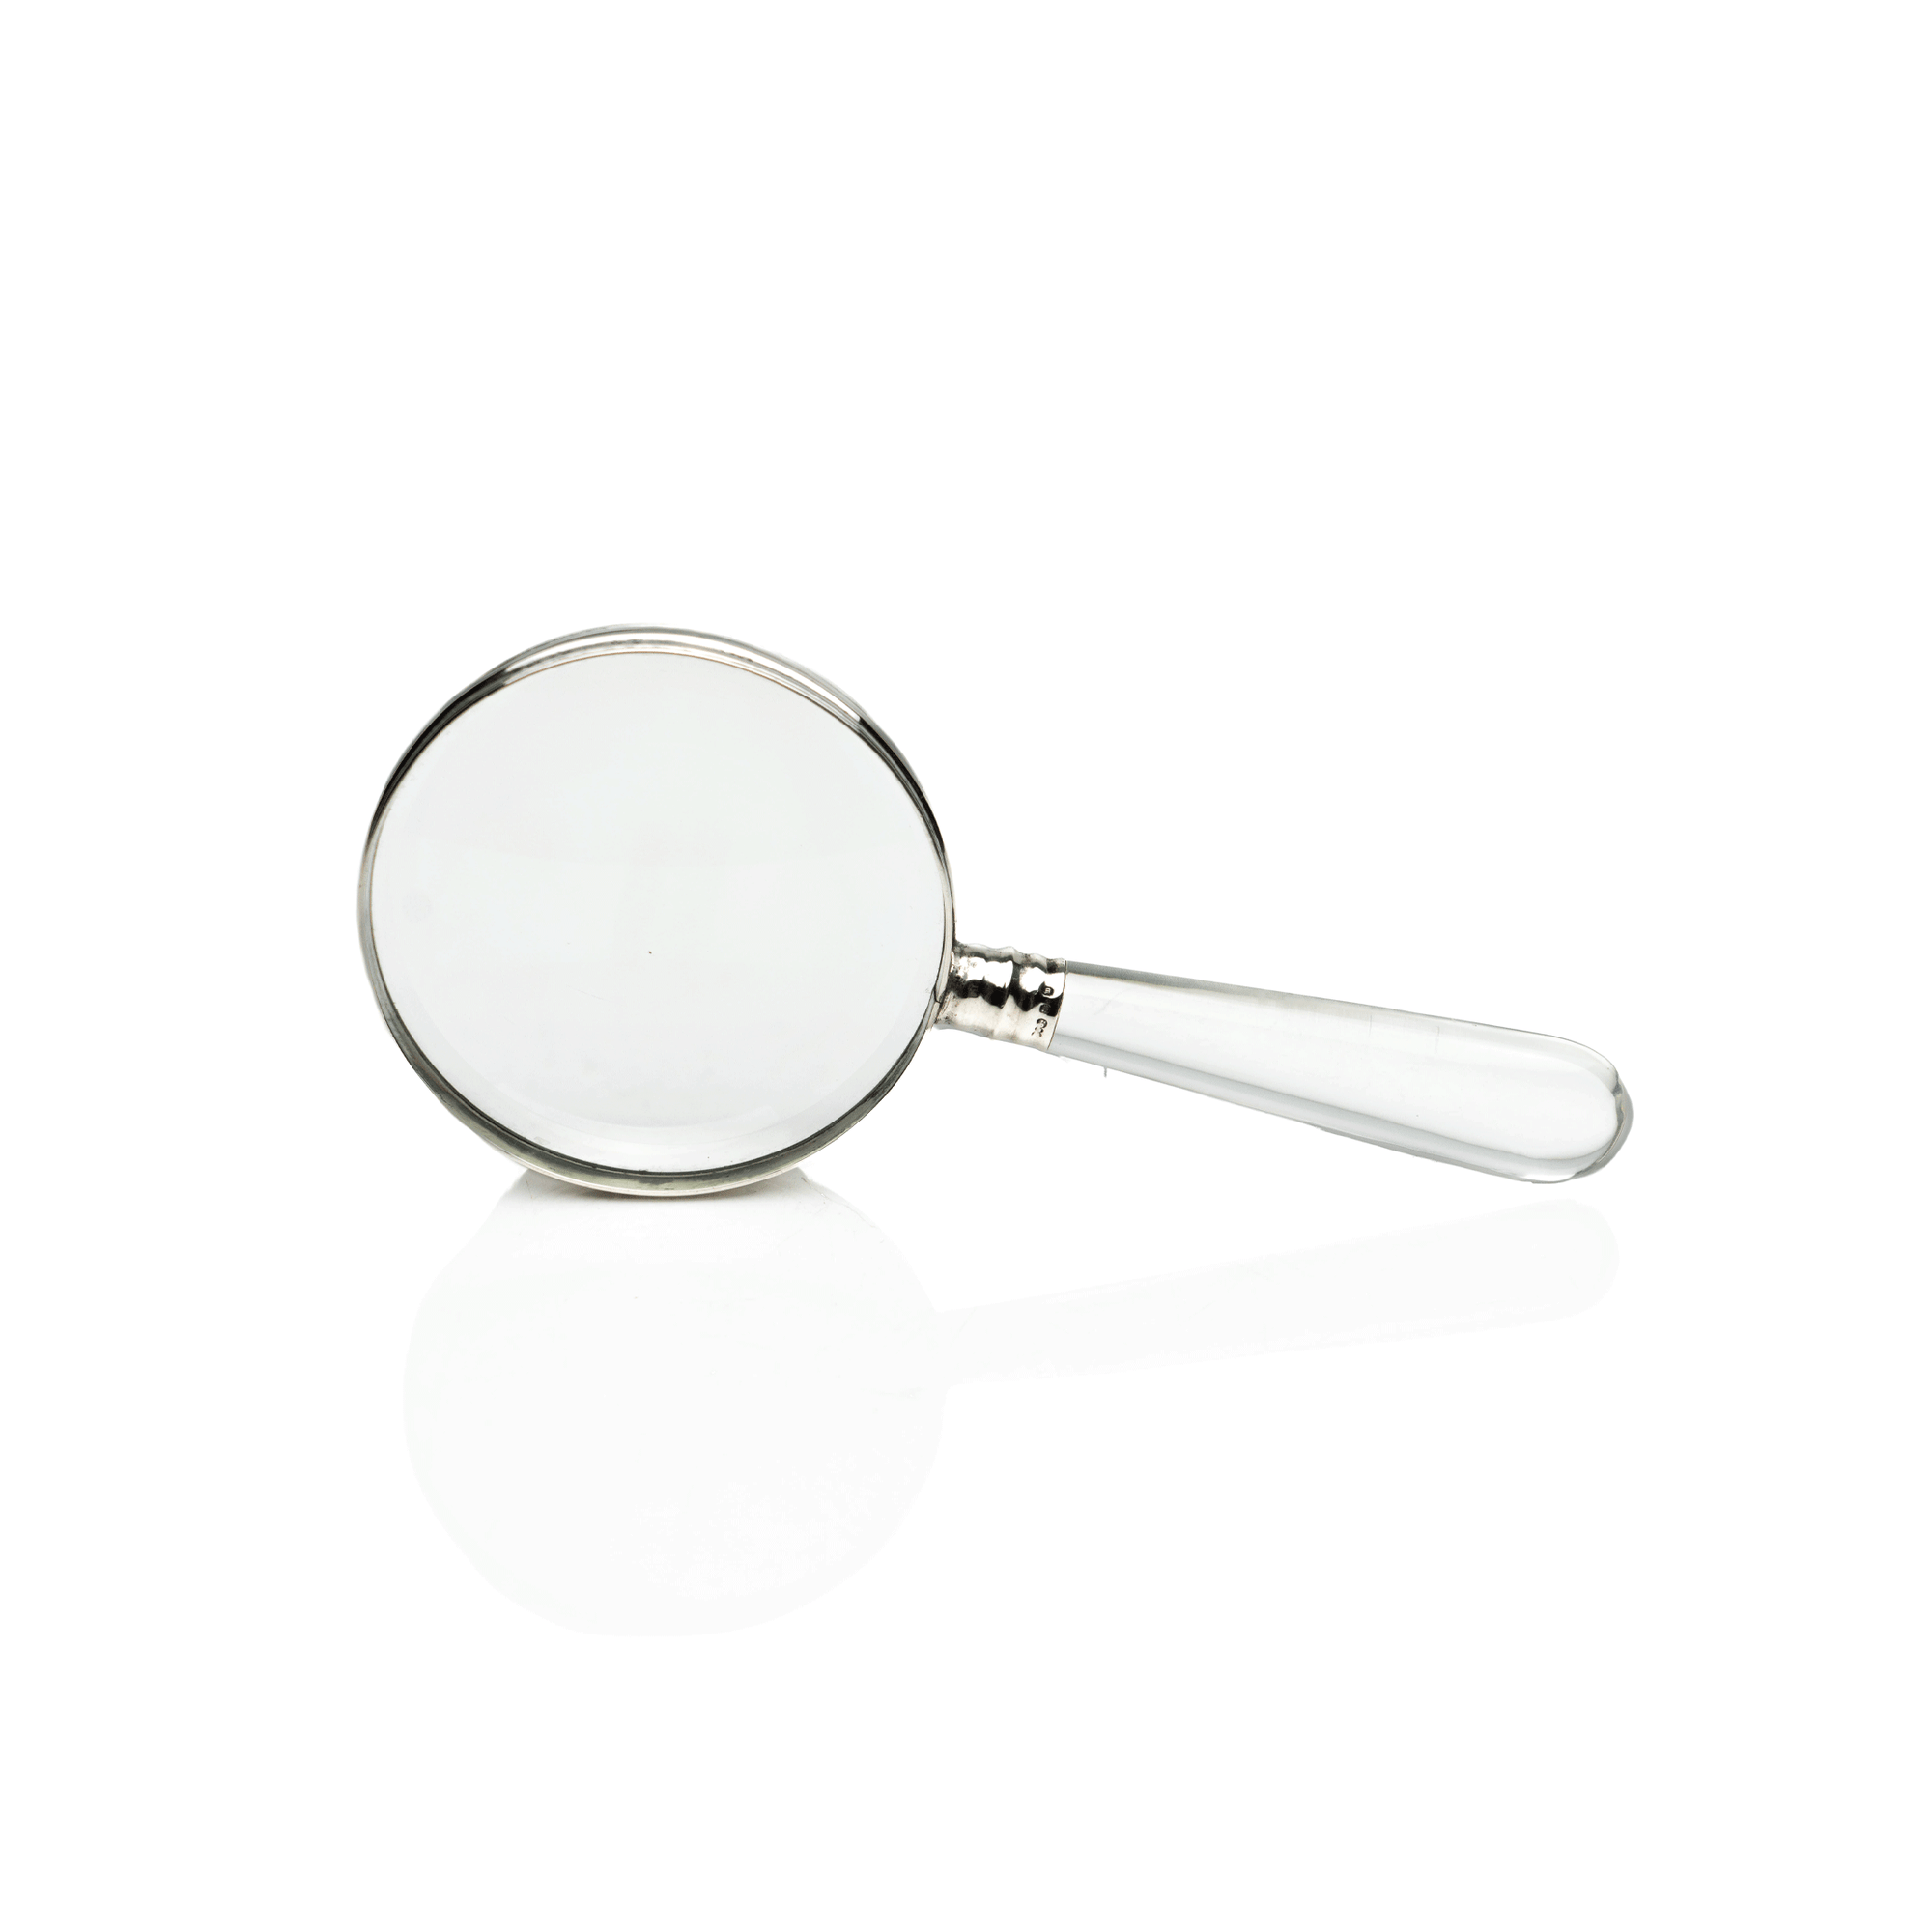 English Magnifier, Rock Crystal & Sterling